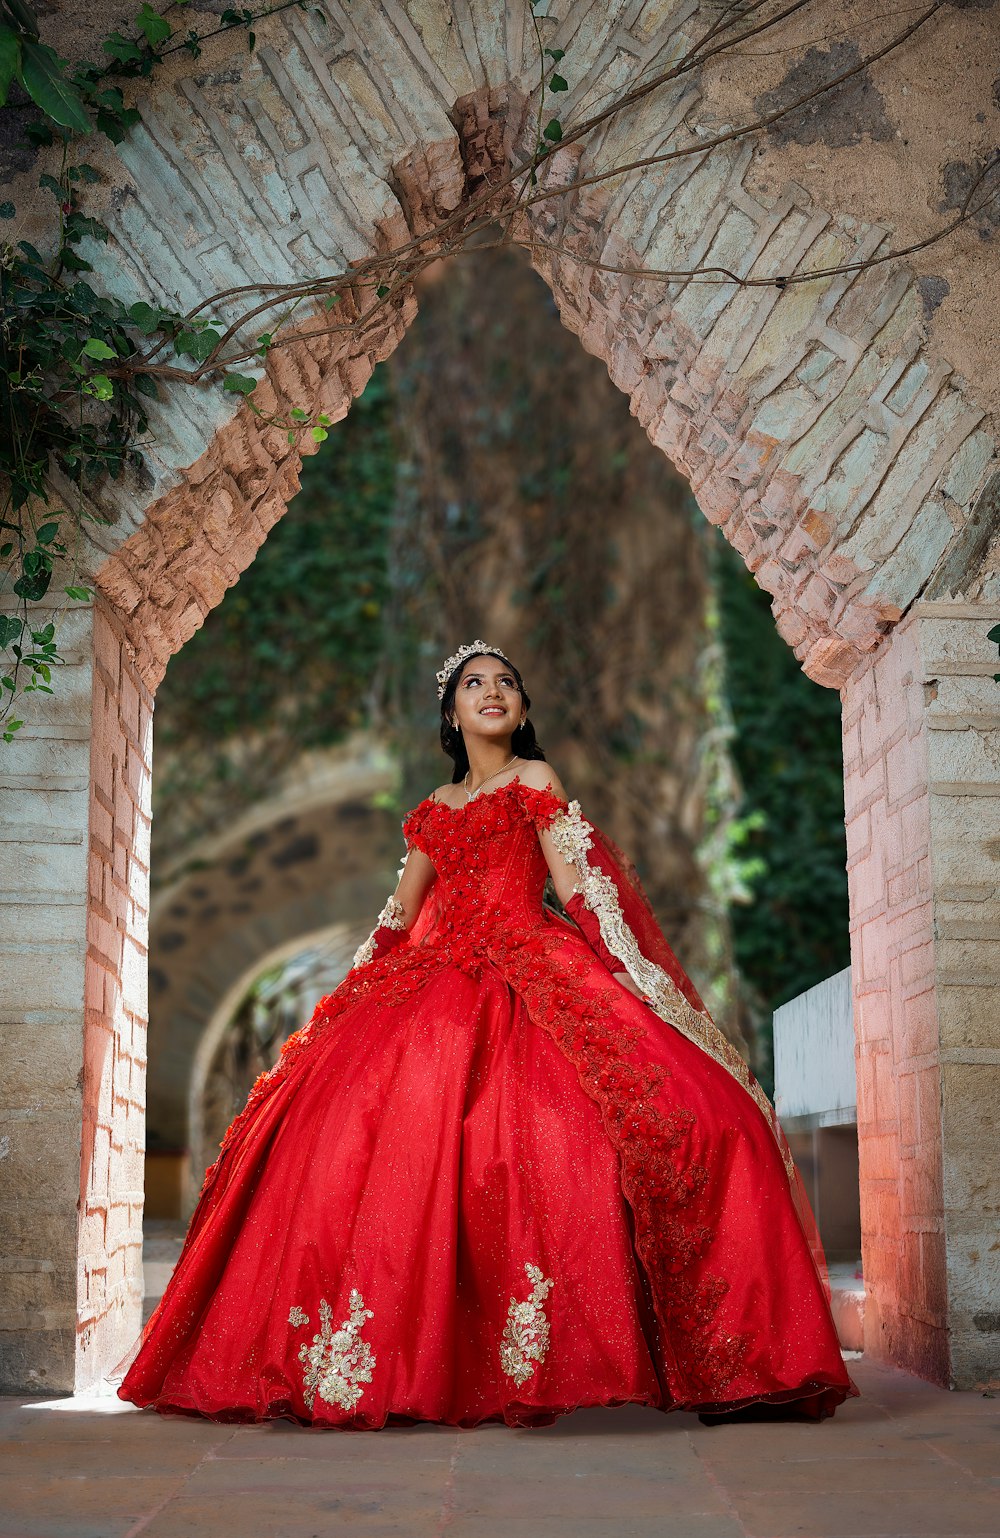 a woman in a red dress standing in an archway